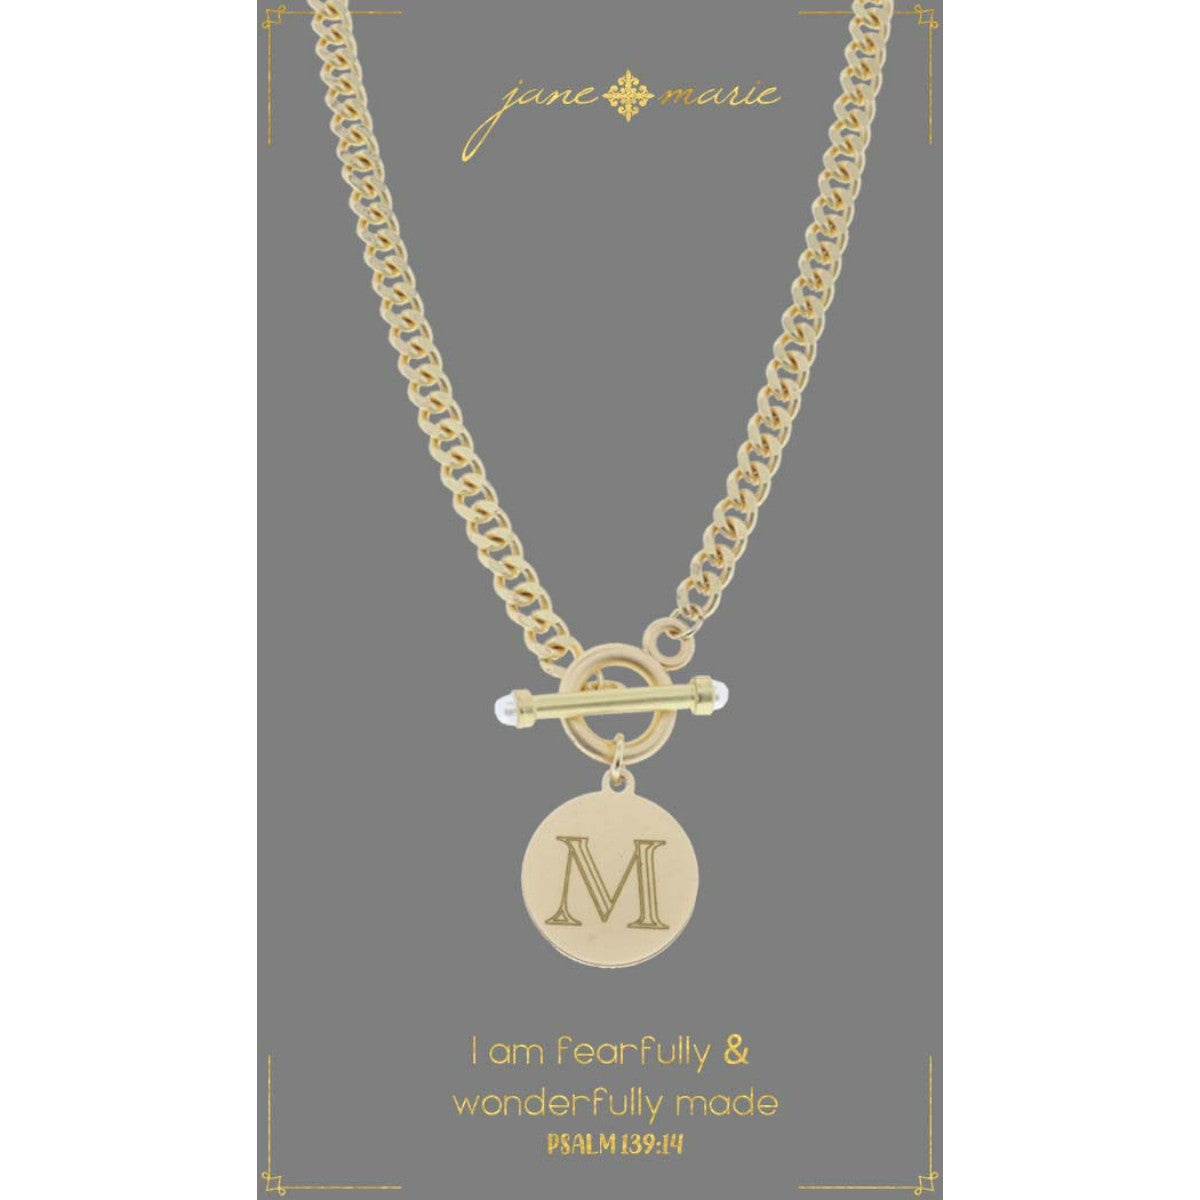 "m" stamped letter necklace on a gray display card on a white background